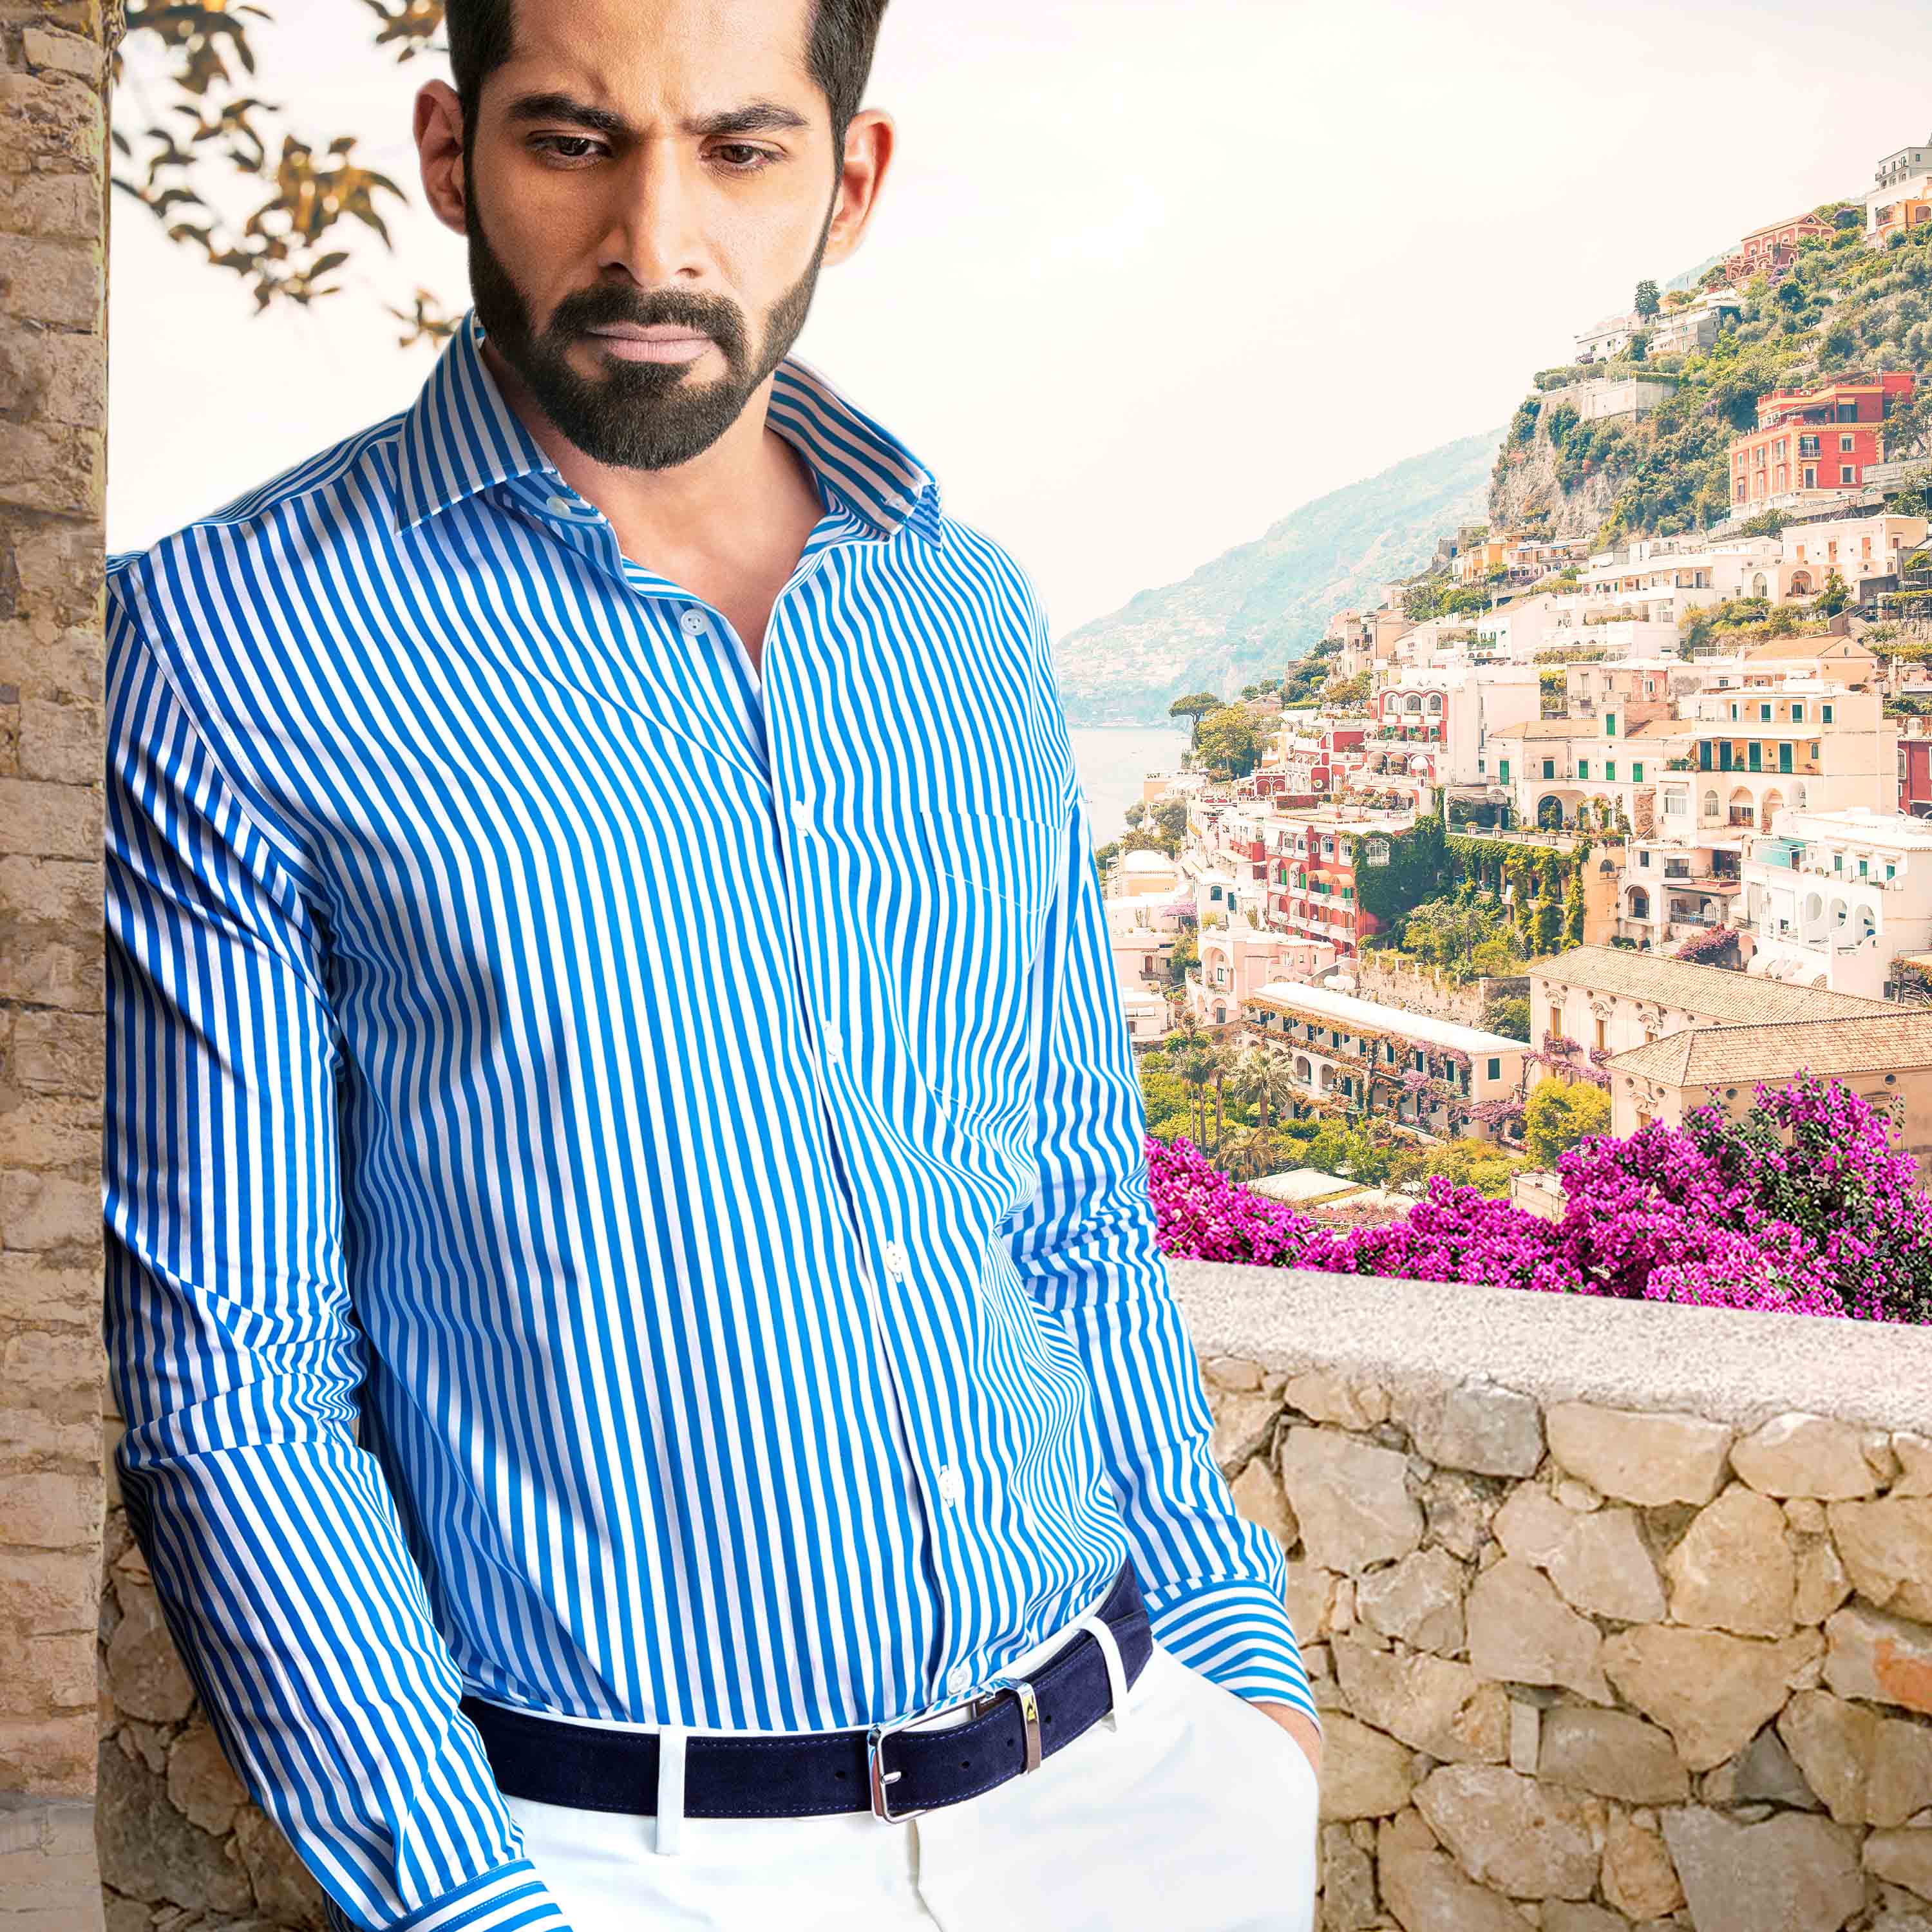  ZODIAC presents The Vivace Collection: “Silk Touch” Cotton Shirts 